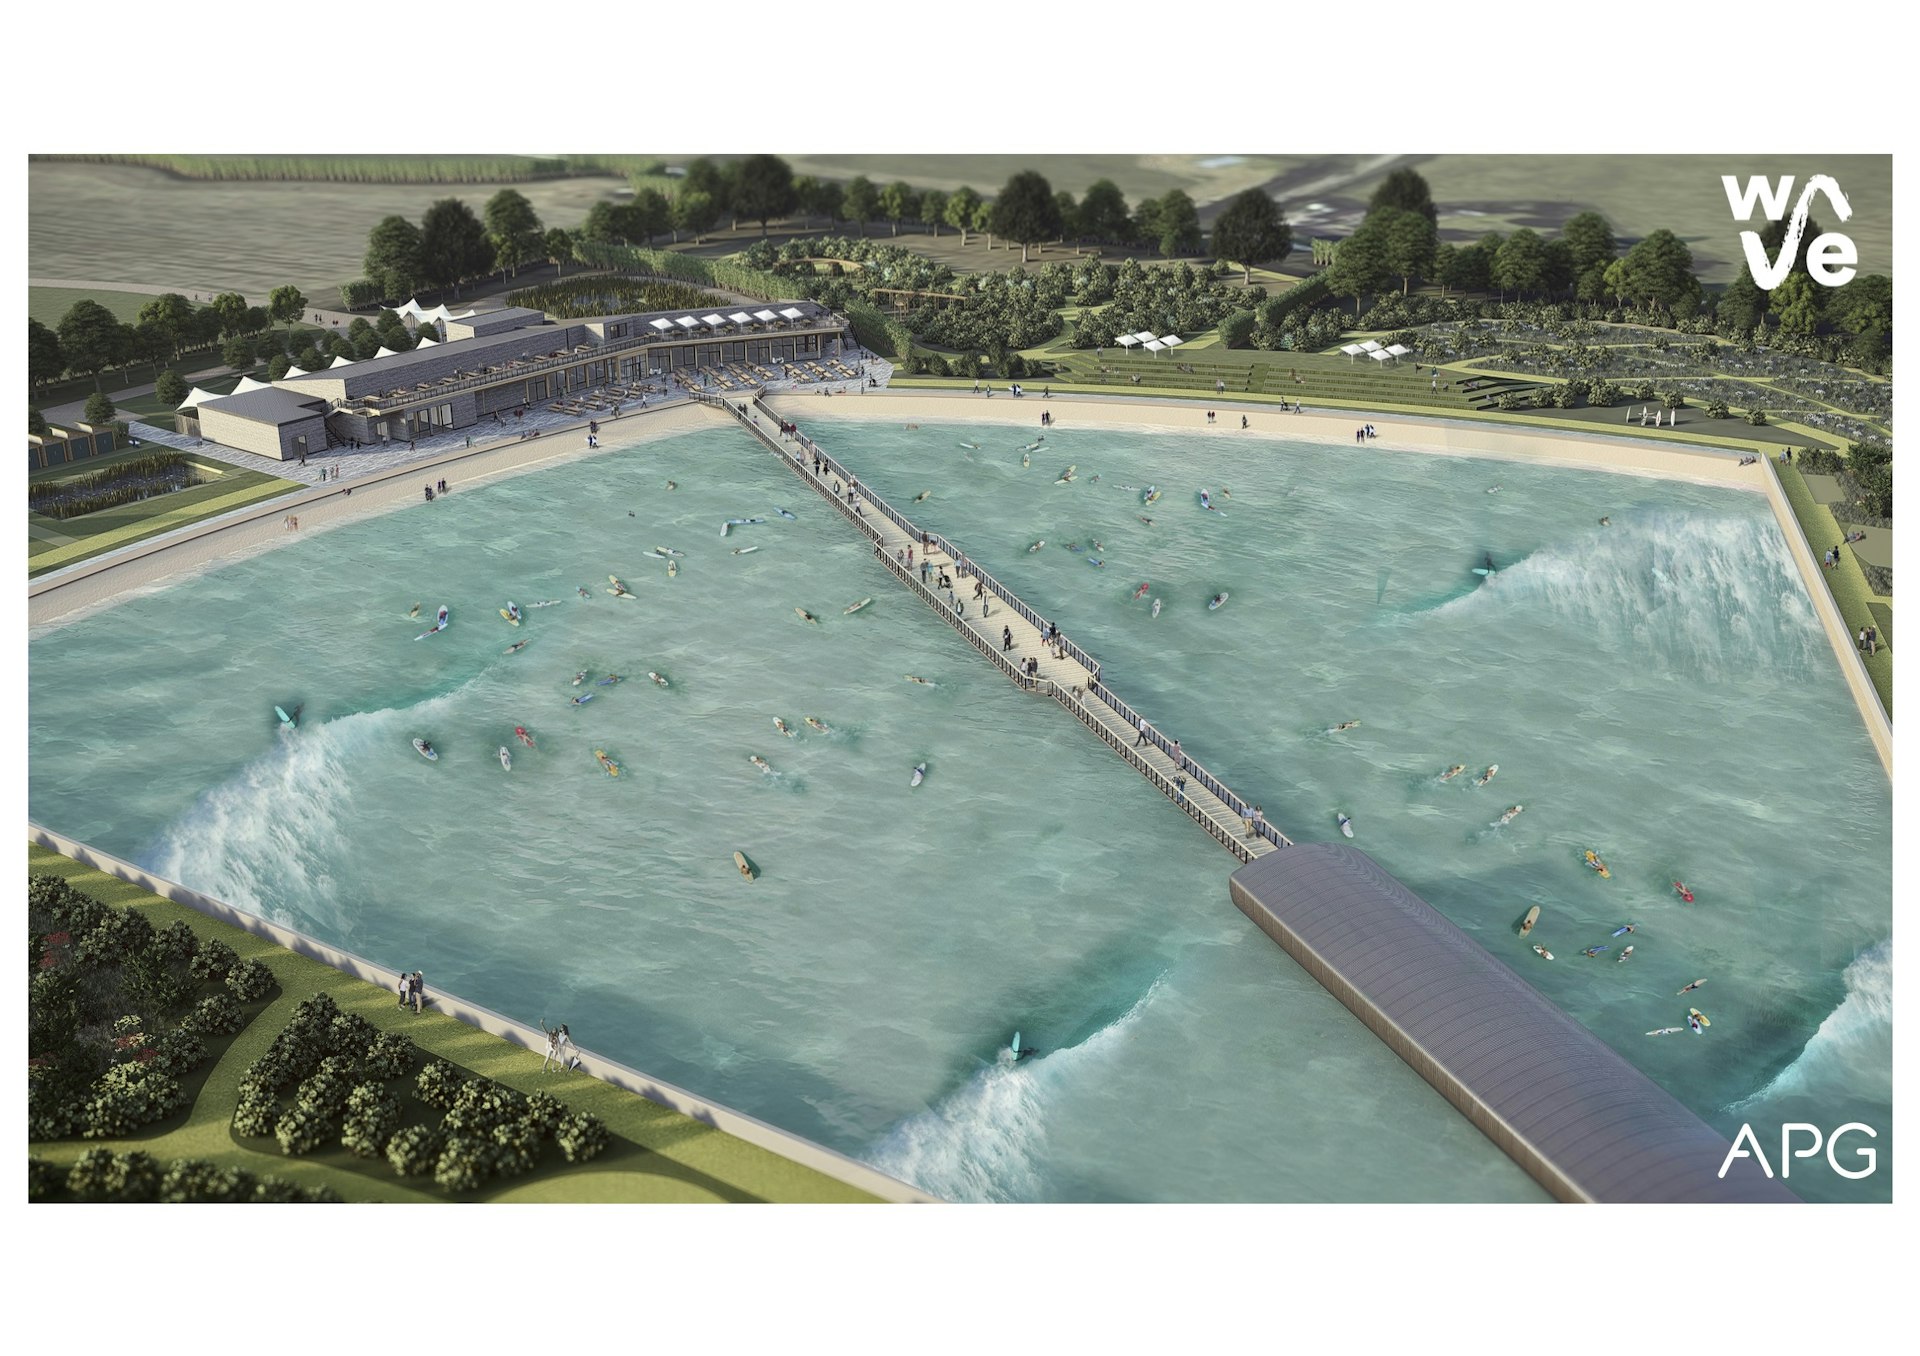 A rendering of an artificial lagoon and wooden clubhouse